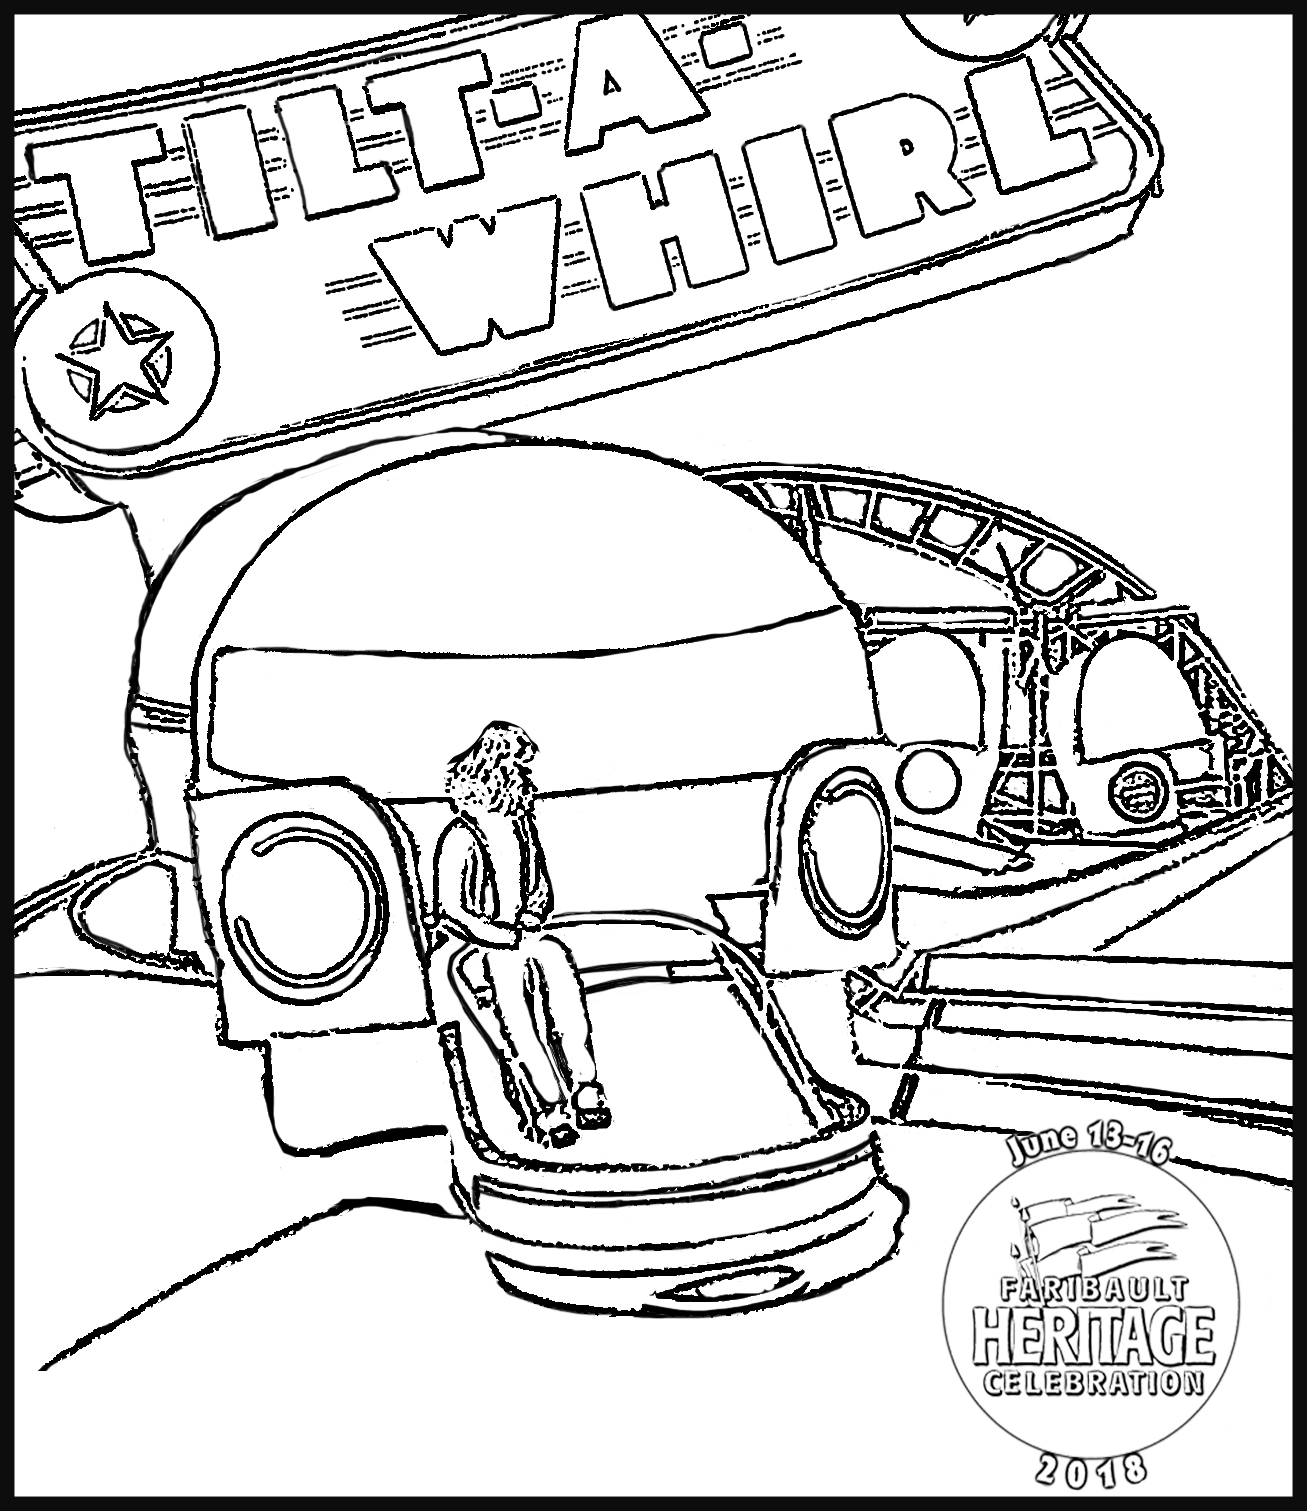 Taco Bell Coloring Pages at GetColorings.com | Free printable colorings pages to print and color